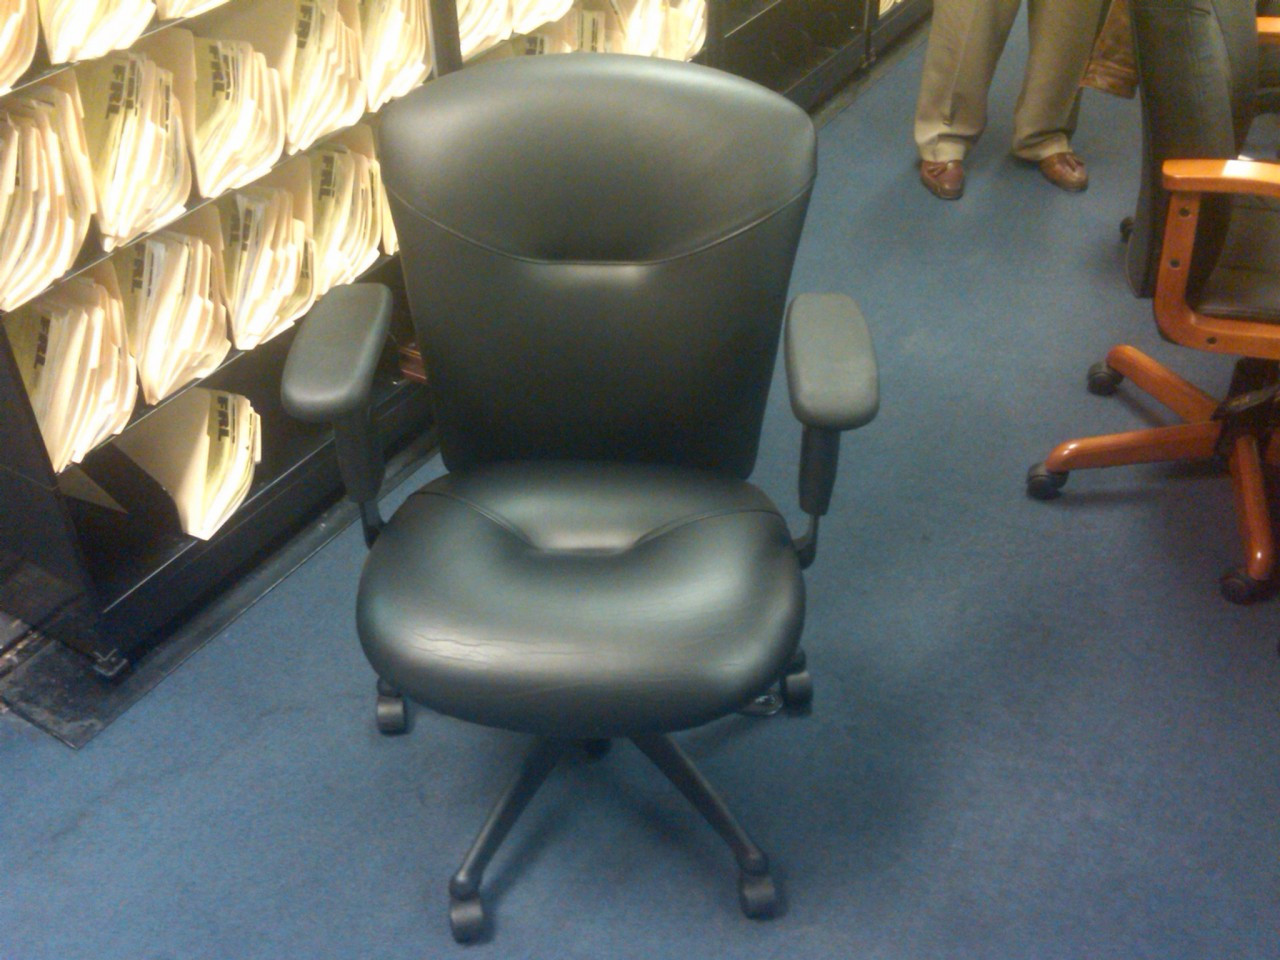 Common Office Chair Problems You Face Soft2share